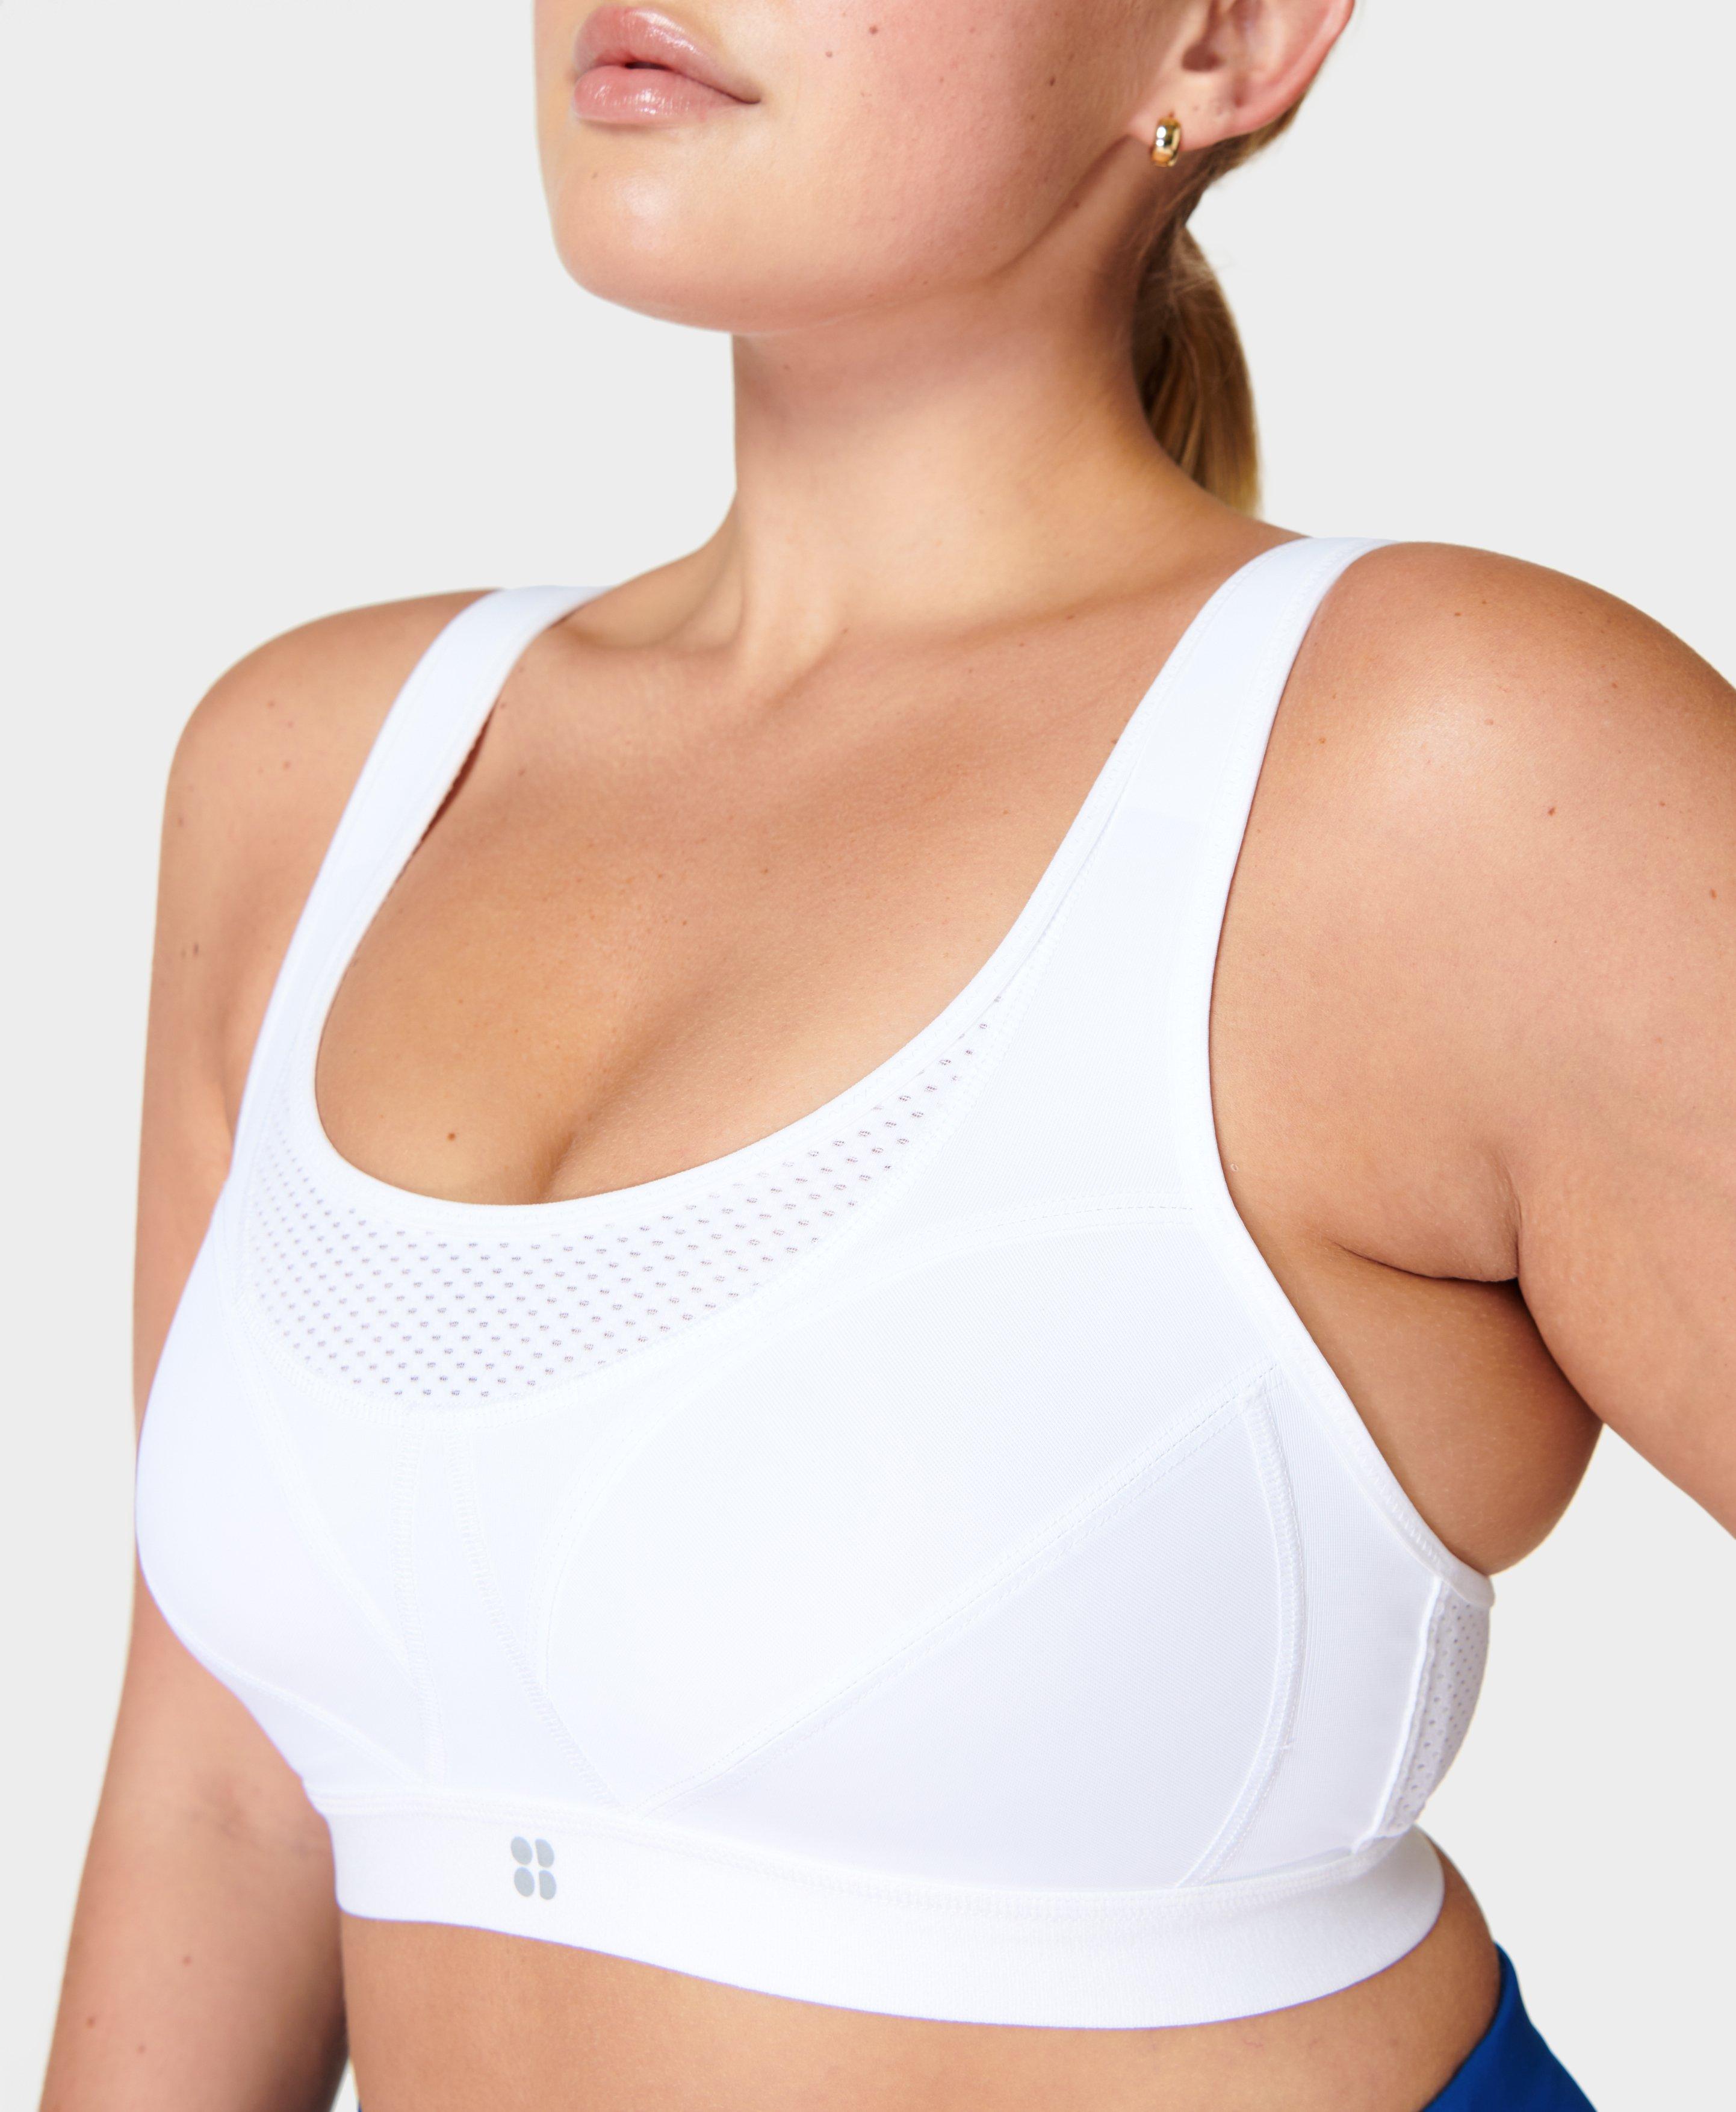 Sports Bra and Running - Virginia Physicians for Women